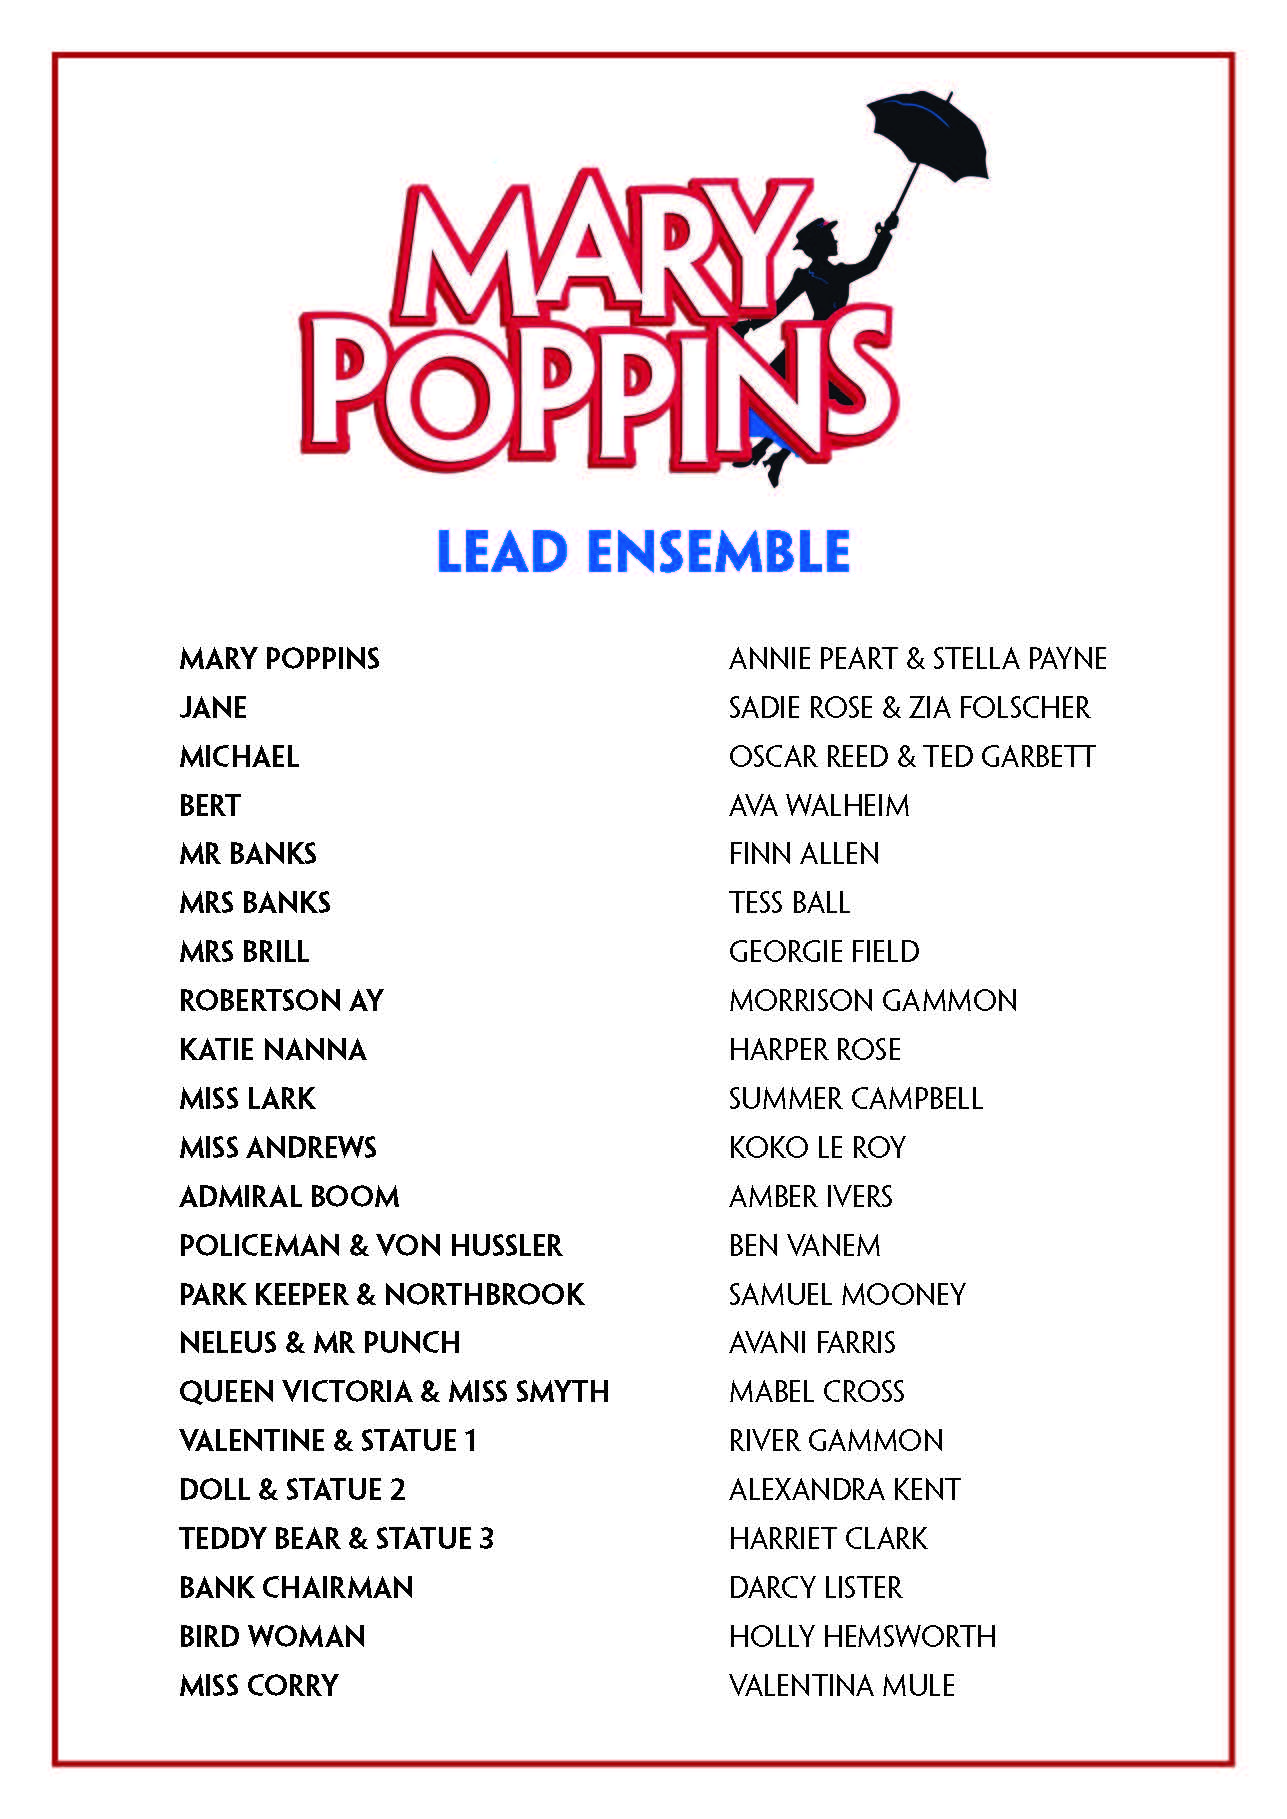 Mary Poppins Cast List (1)_Page_1